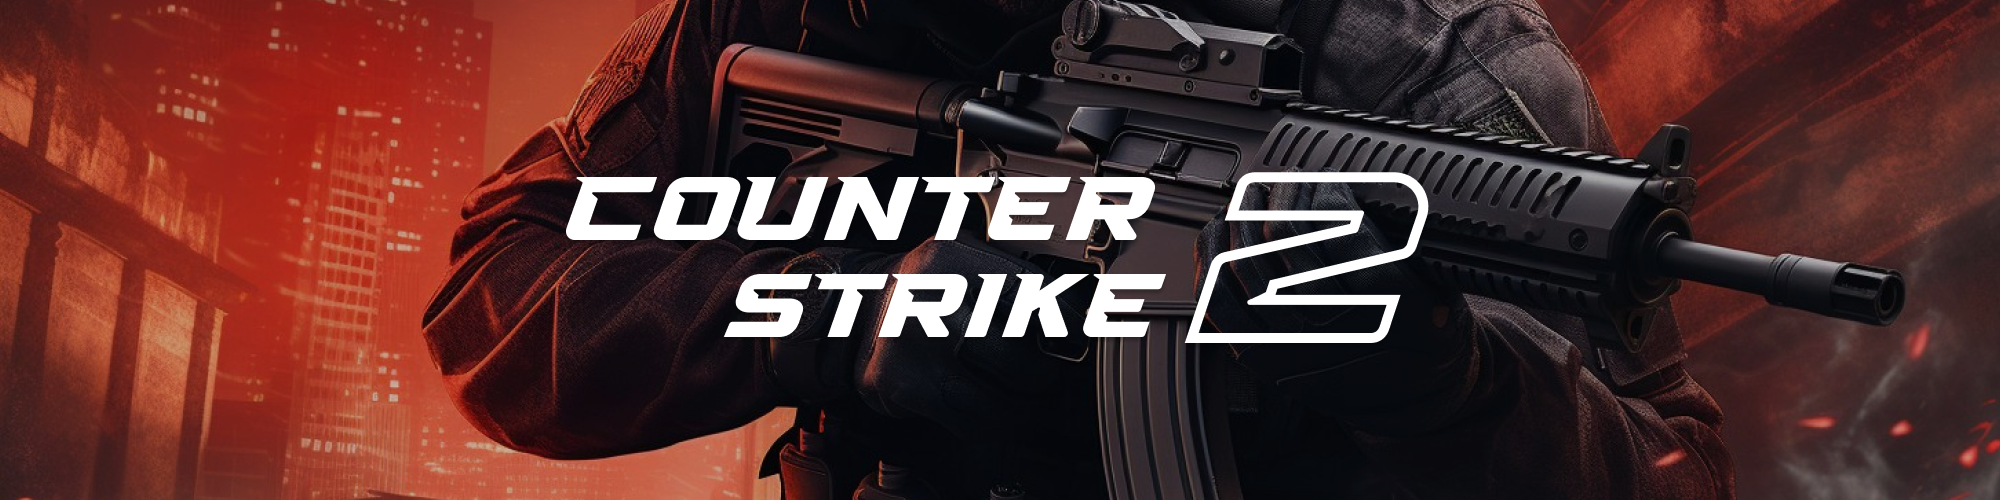 Counter Strike Global Offensive PC Game Multiplayer Free Download Setup